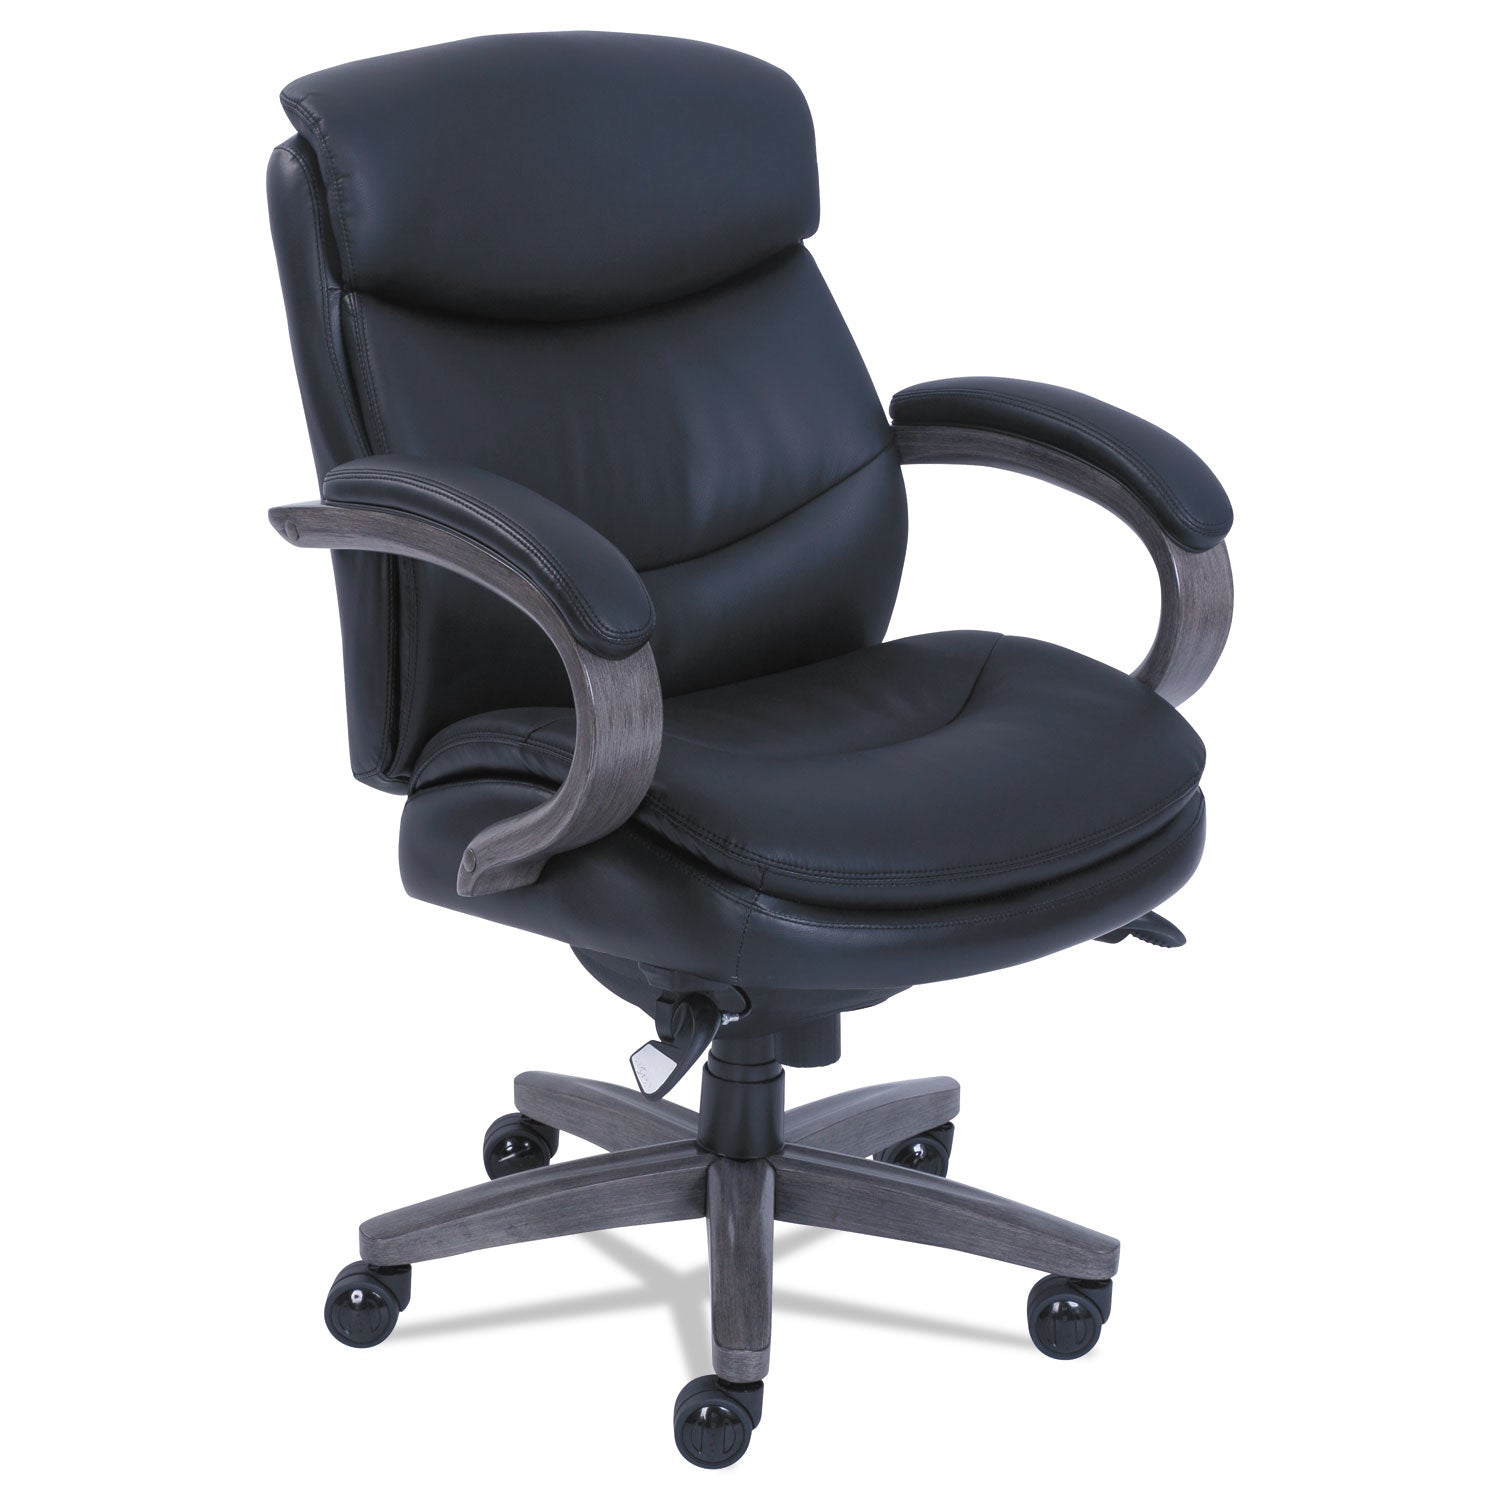 woodbury-mid-back-executive-chair-supports-up-to-300-lb-1875-to-2175-seat-height-black-seat-back-weathered-gray-base_lzb48963a - 1